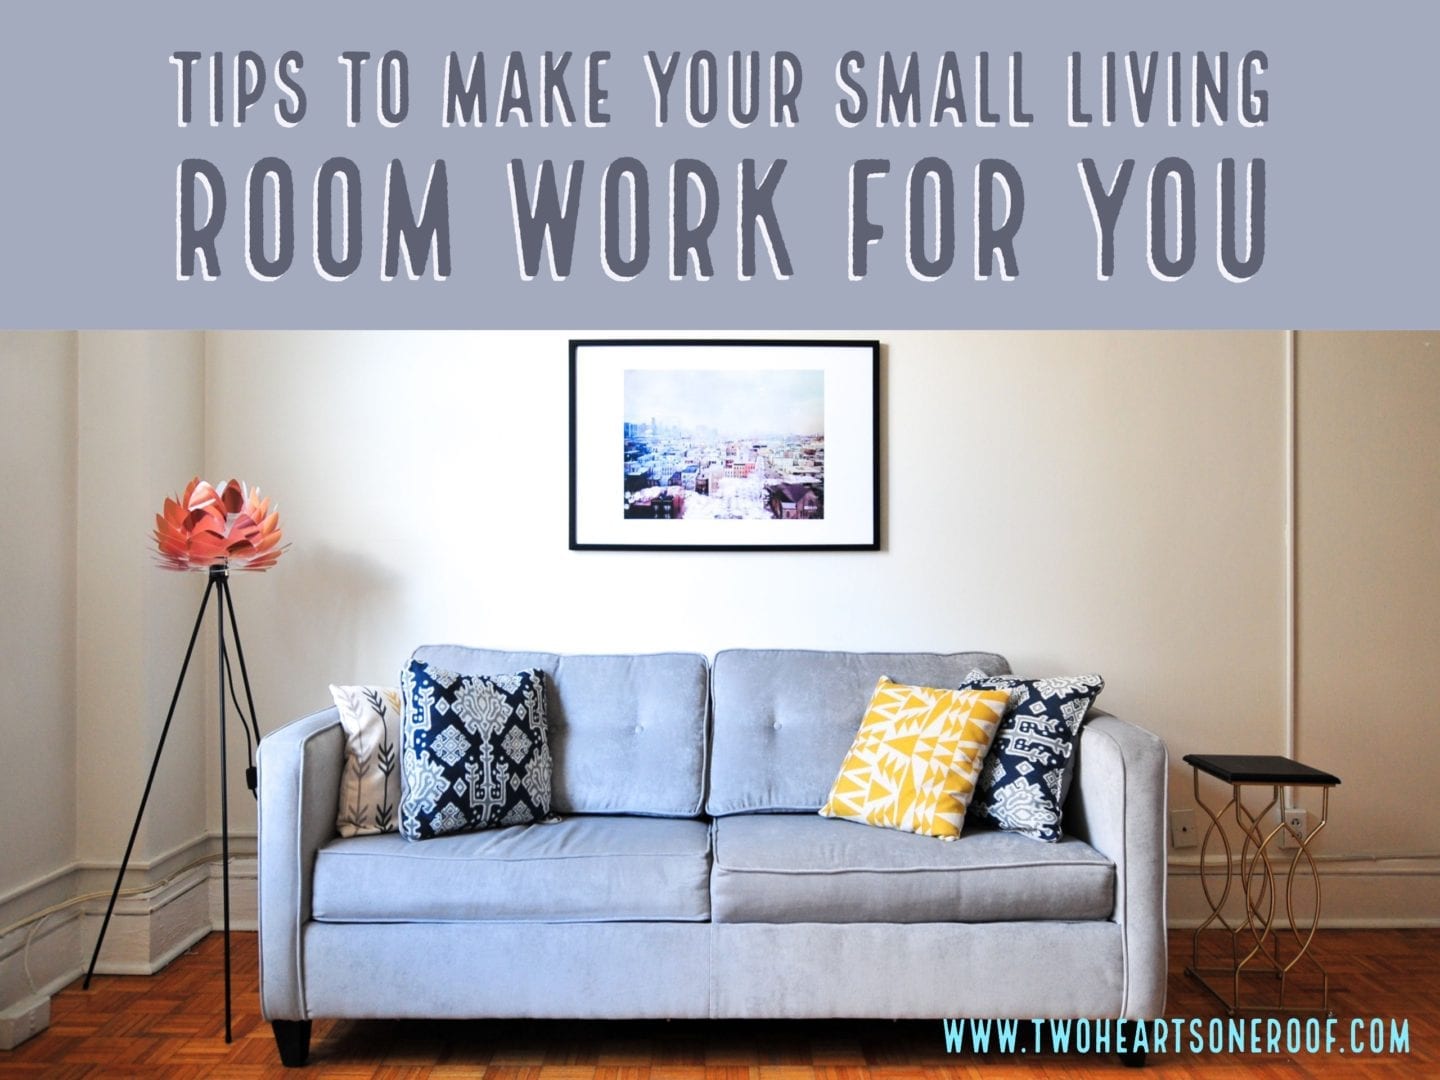 Tips To Make Your Small Living Room Work For You